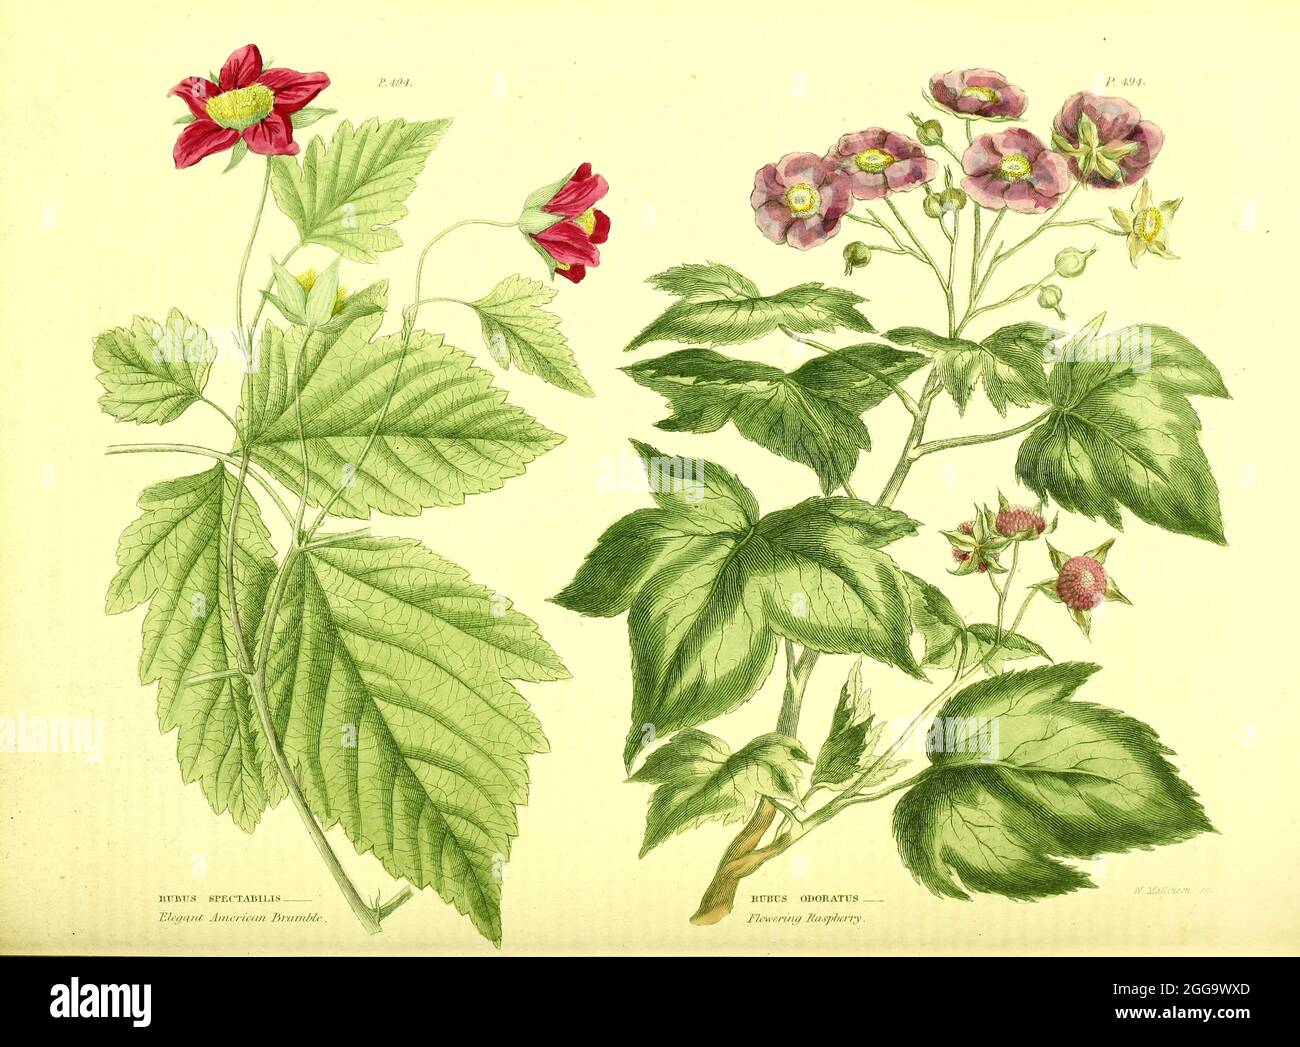 Rubus spectabilis [Elegant American Bramble], Rubus odoratus [Flowering Raspberry] from Vol II of the book The universal herbal : or botanical, medical and agricultural dictionary : containing an account of all known plants in the world, arranged according to the Linnean system. Specifying the uses to which they are or may be applied By Thomas Green,  Published in 1816 by Nuttall, Fisher & Co. in Liverpool and Printed at the Caxton Press by H. Fisher Stock Photo